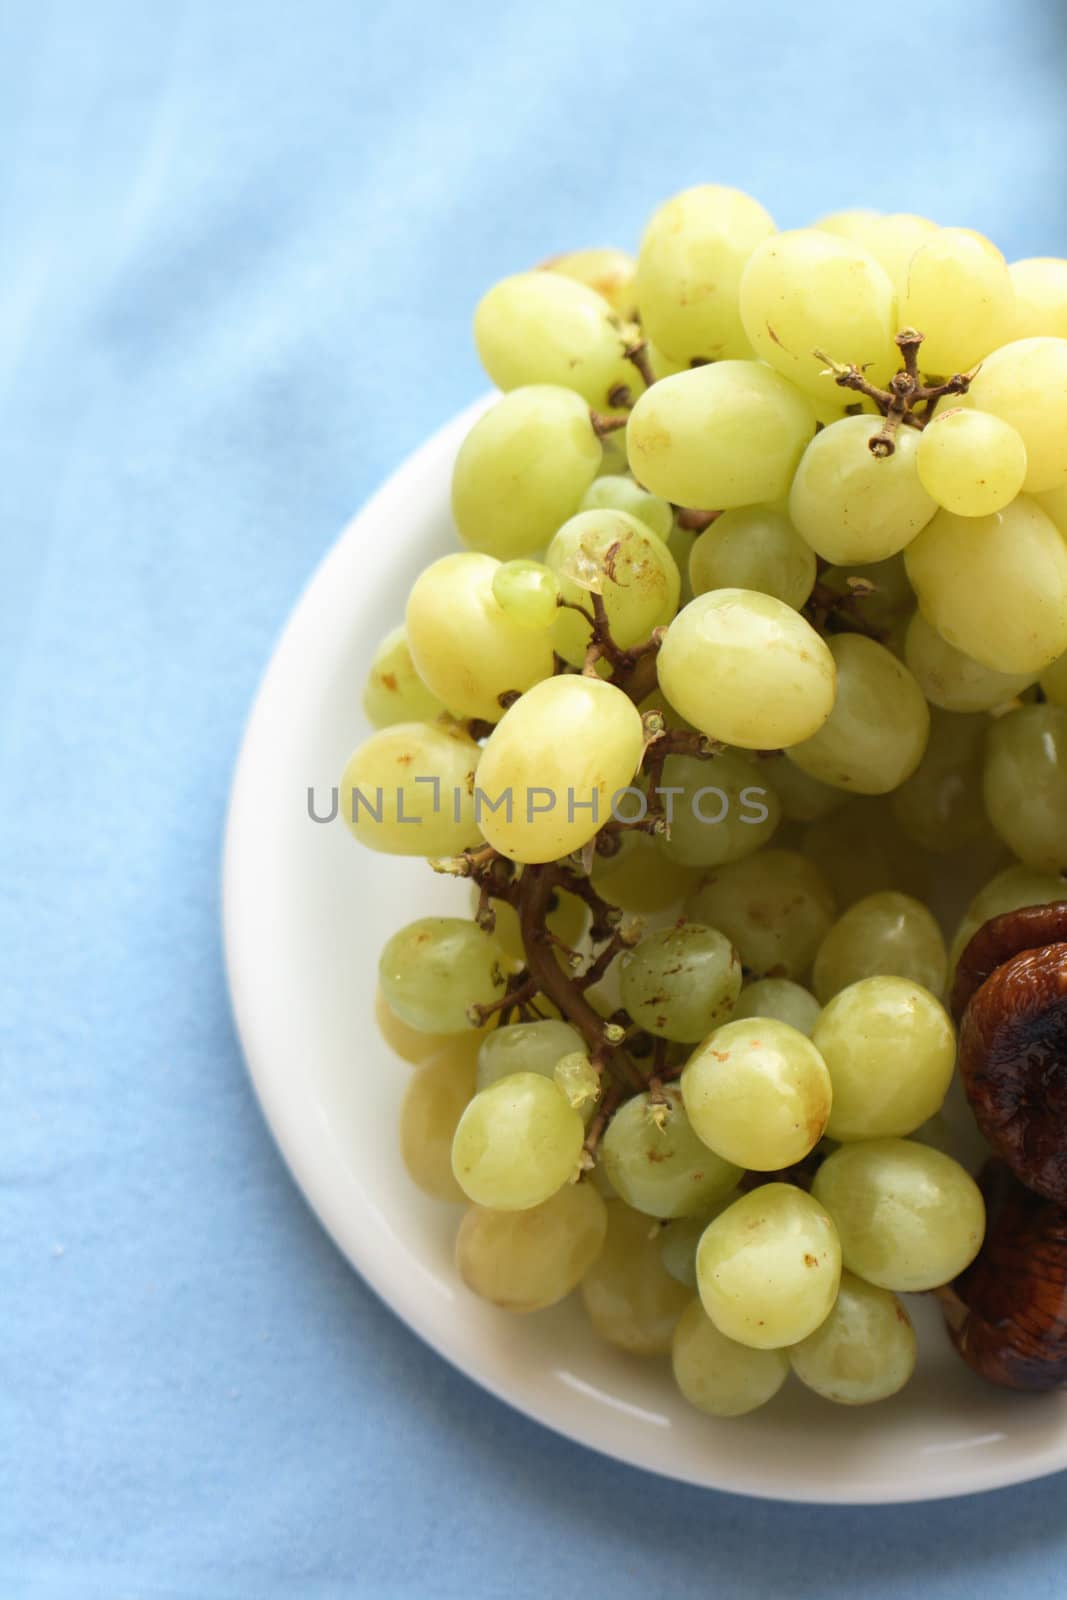 grapes on the plate on the blue background